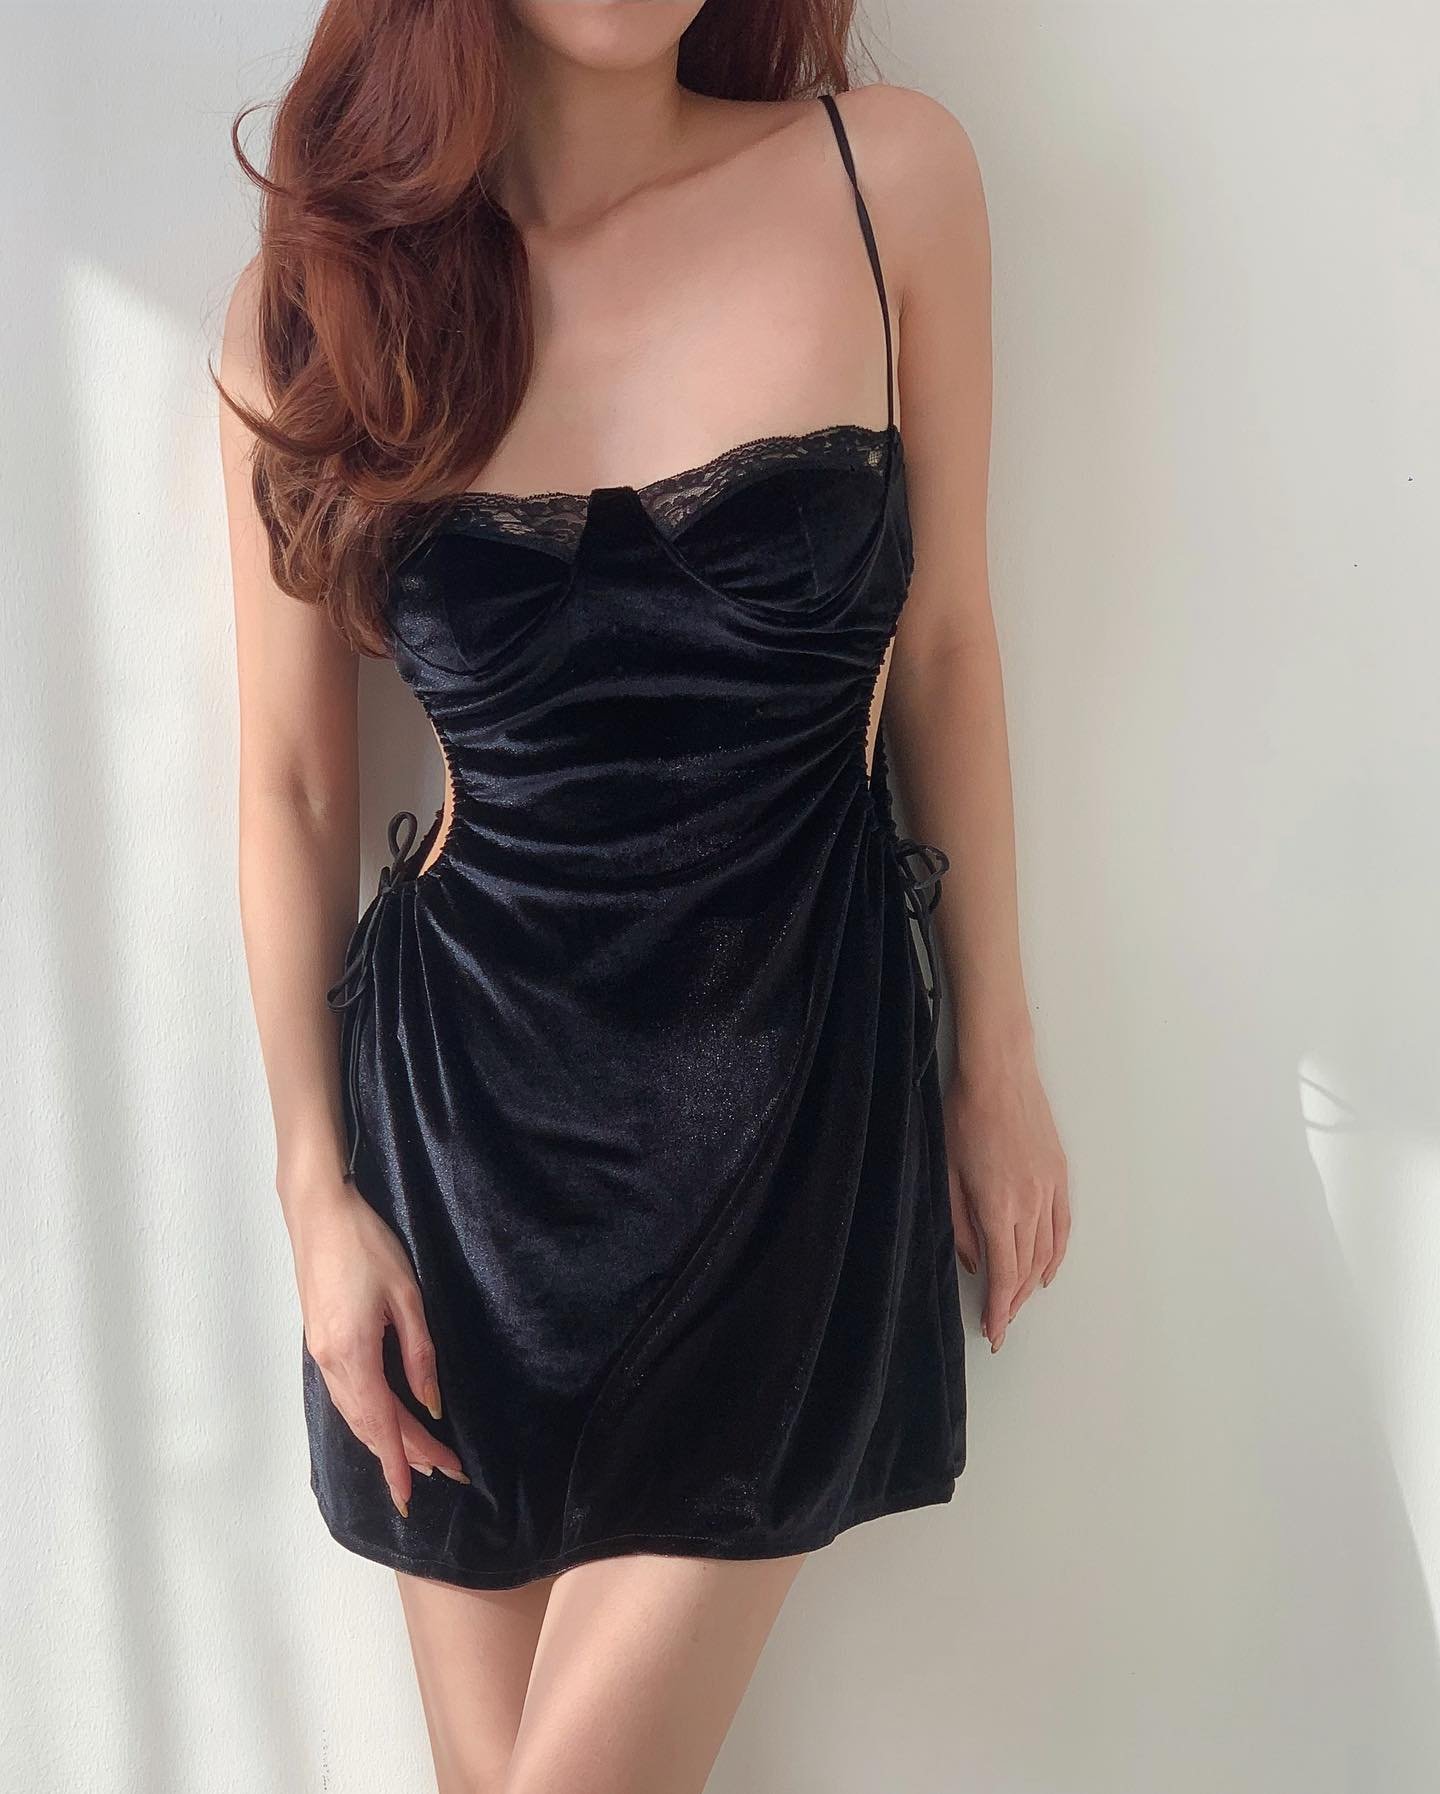 &mdash;&mdash; Must have! Our Viana Velvet Dress is chic and alluring, featuring two waist-level cutouts for added allure. It&rsquo;s both comfortable and stylish, making it an ideal choice for a date night 🖤

Size: Free Size

Explore more stunning 